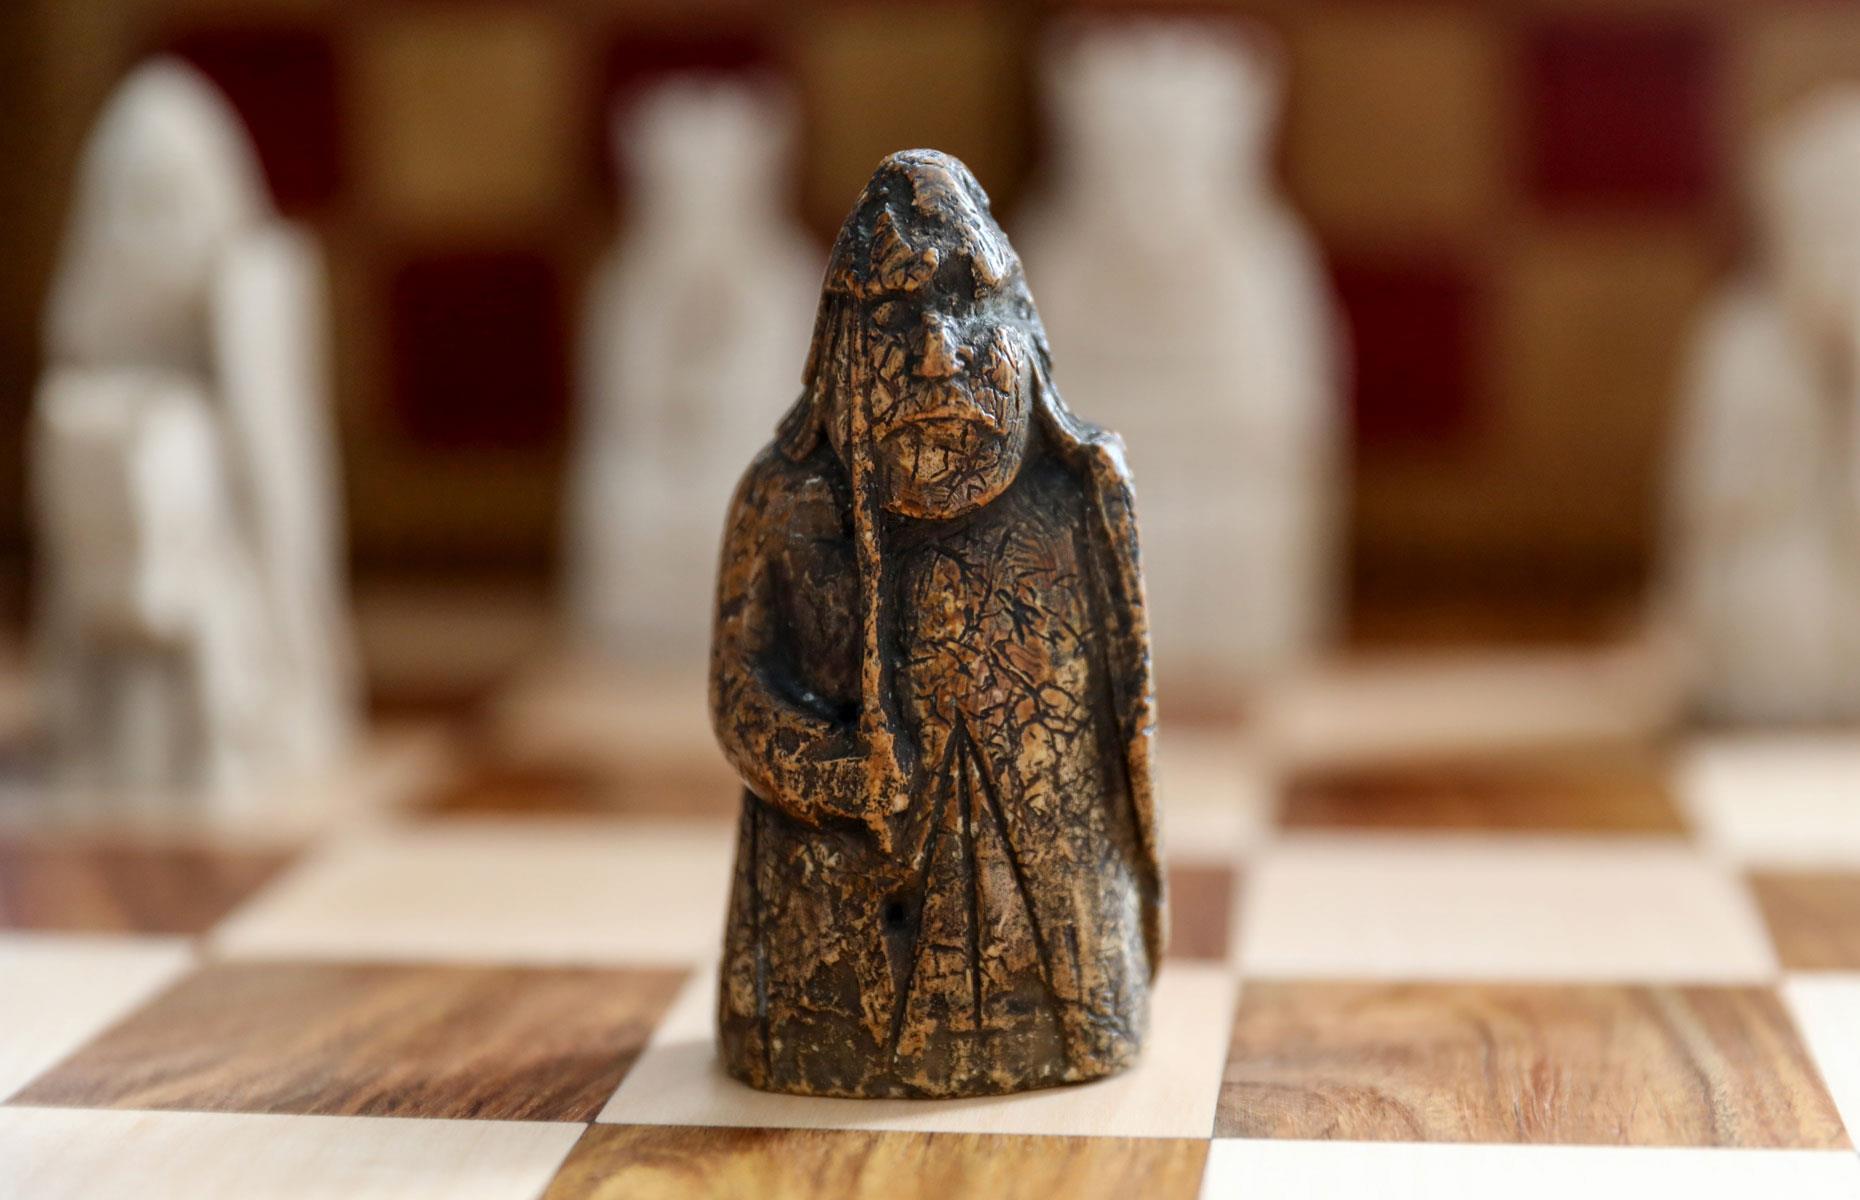 The long-lost chess piece worth hundreds of thousands of pounds